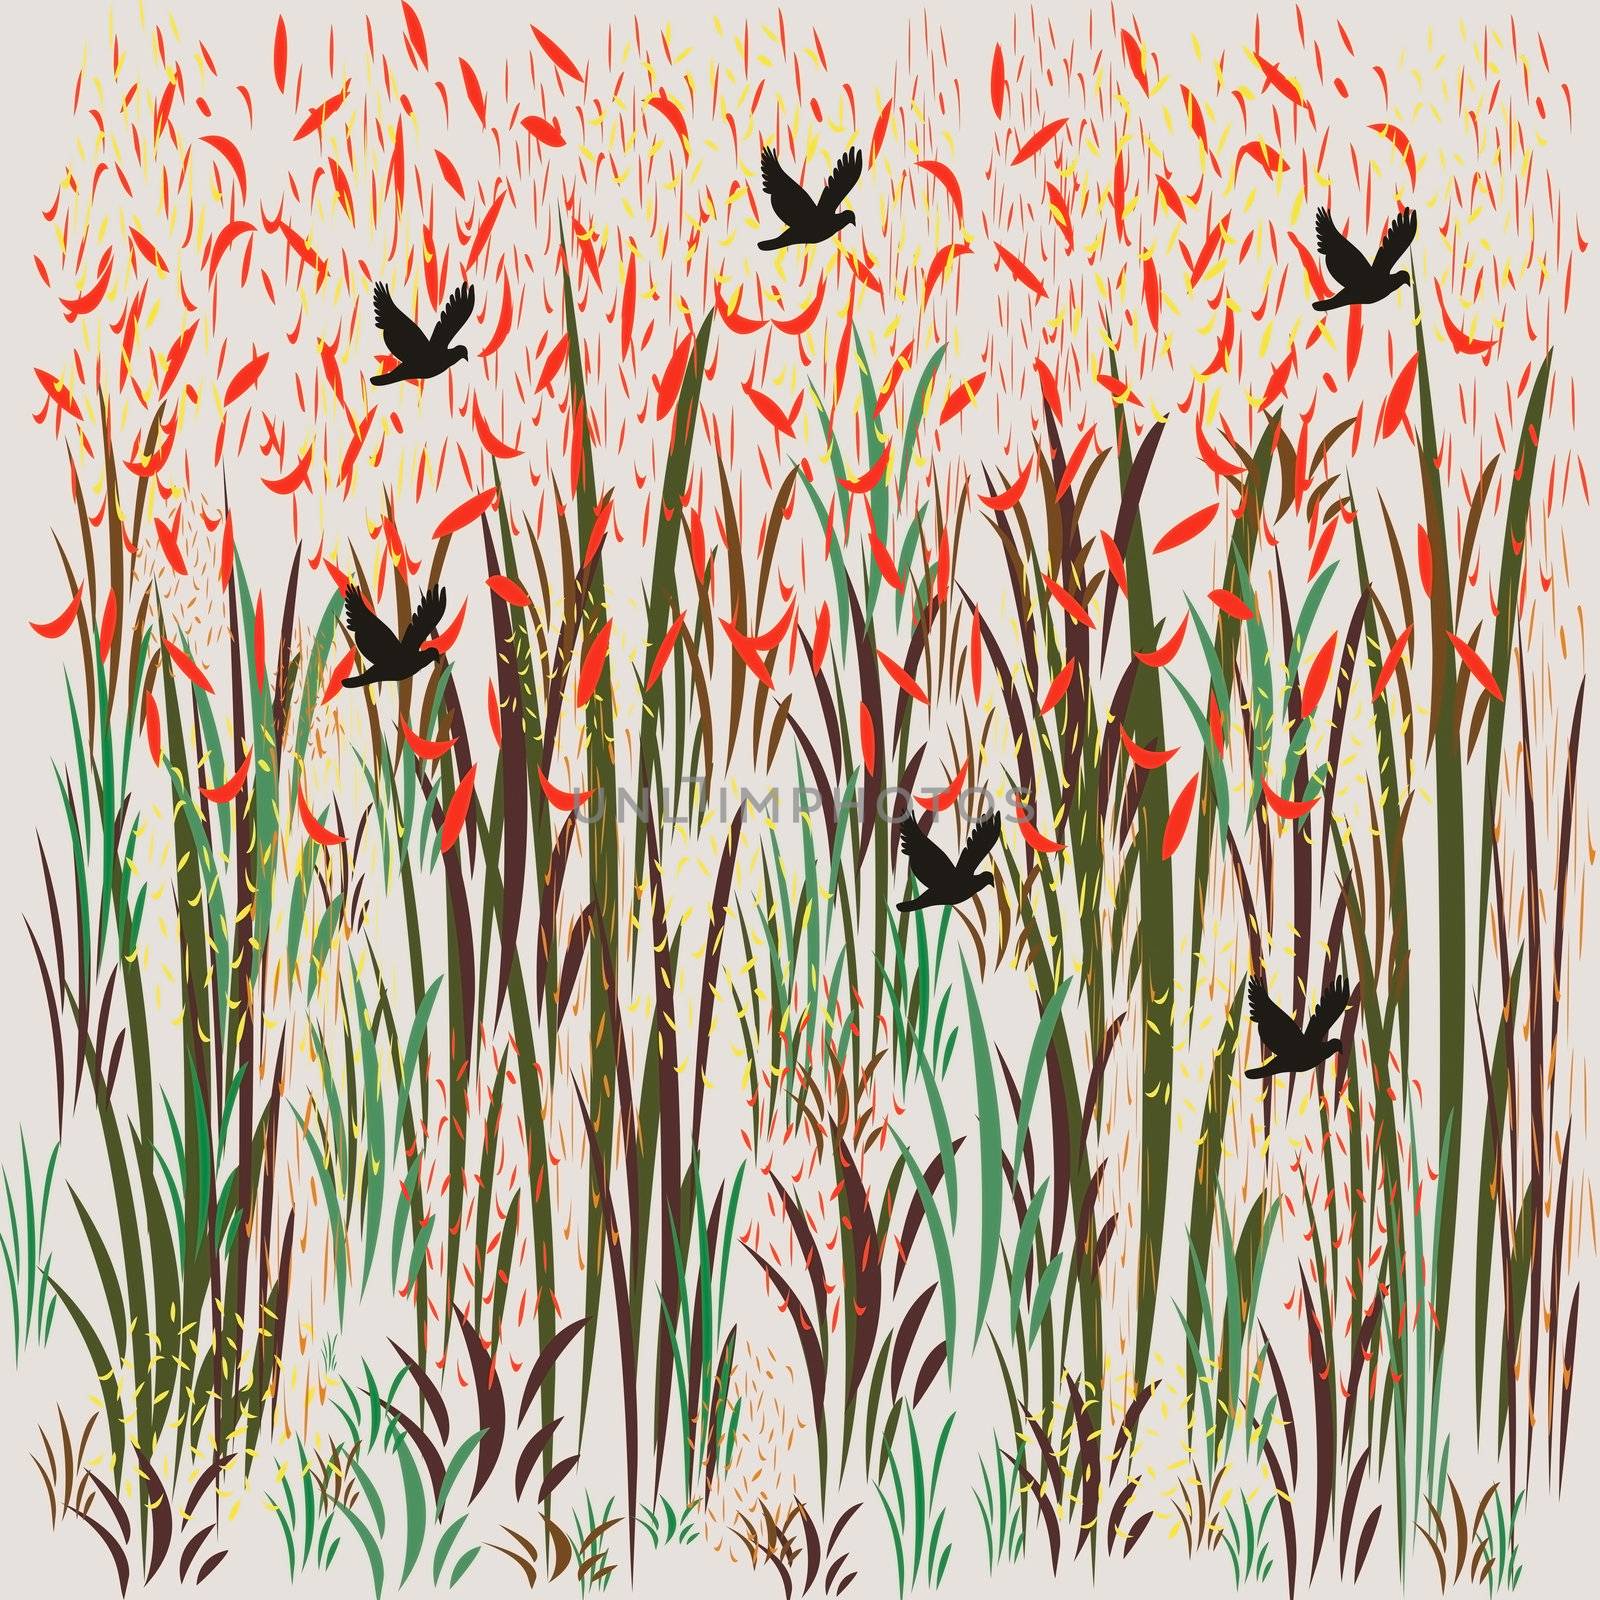 Birds flying through the grasslands by hicster